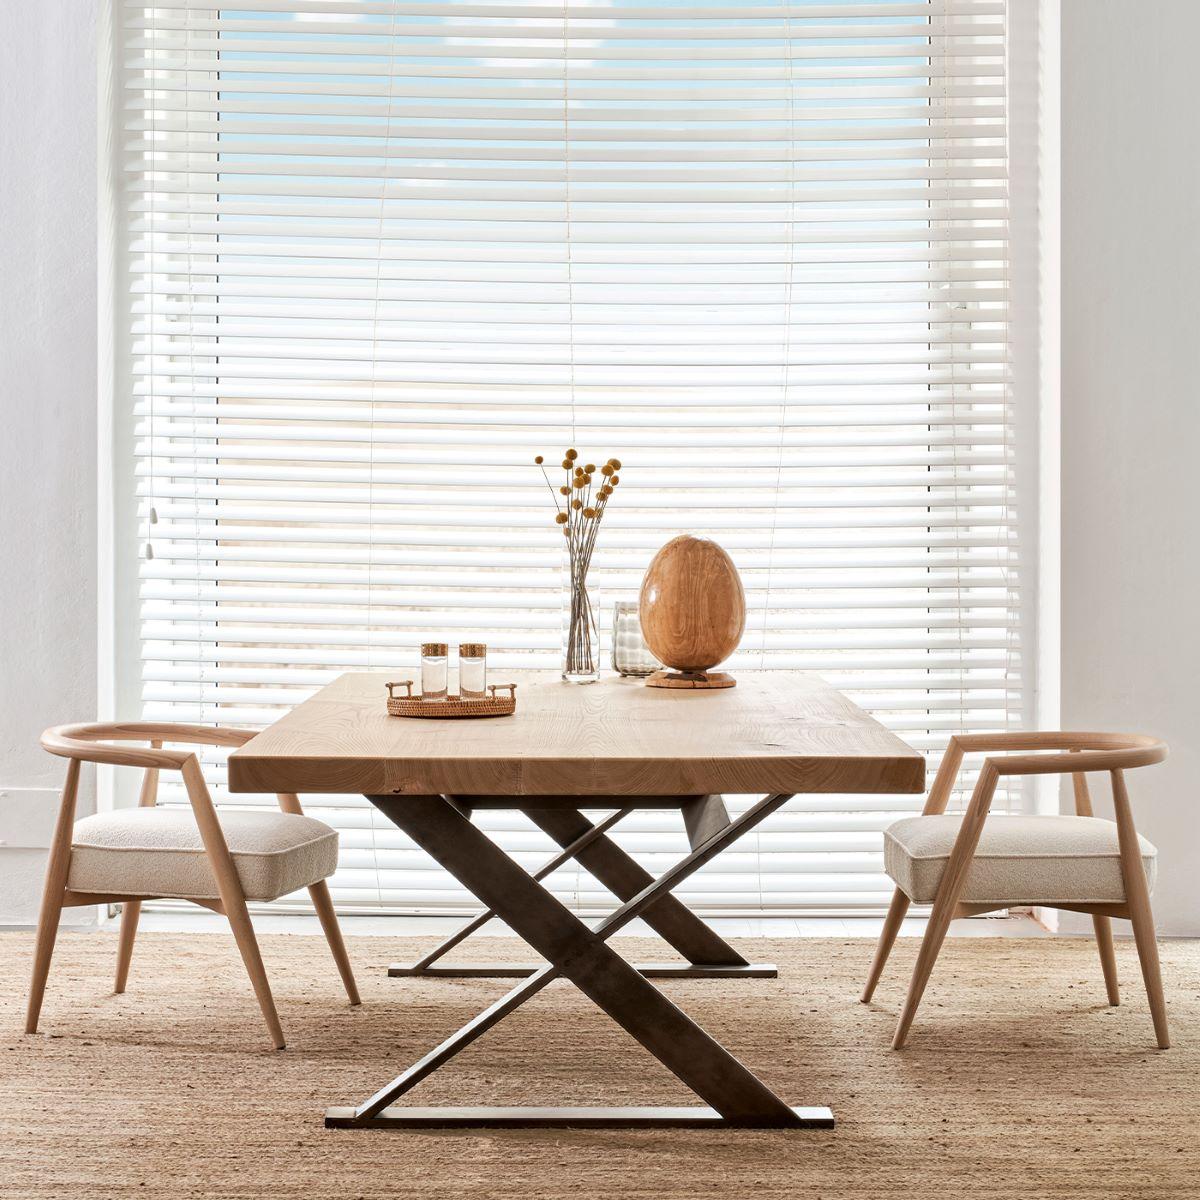 Reminiscent of a picnic table with X-shaped legs, this gorgeous dining table will make an original statement in a contemporary or rustic-chic interior space. Resting on a gray-lacquered structure, it features a large rectangular wooden top.